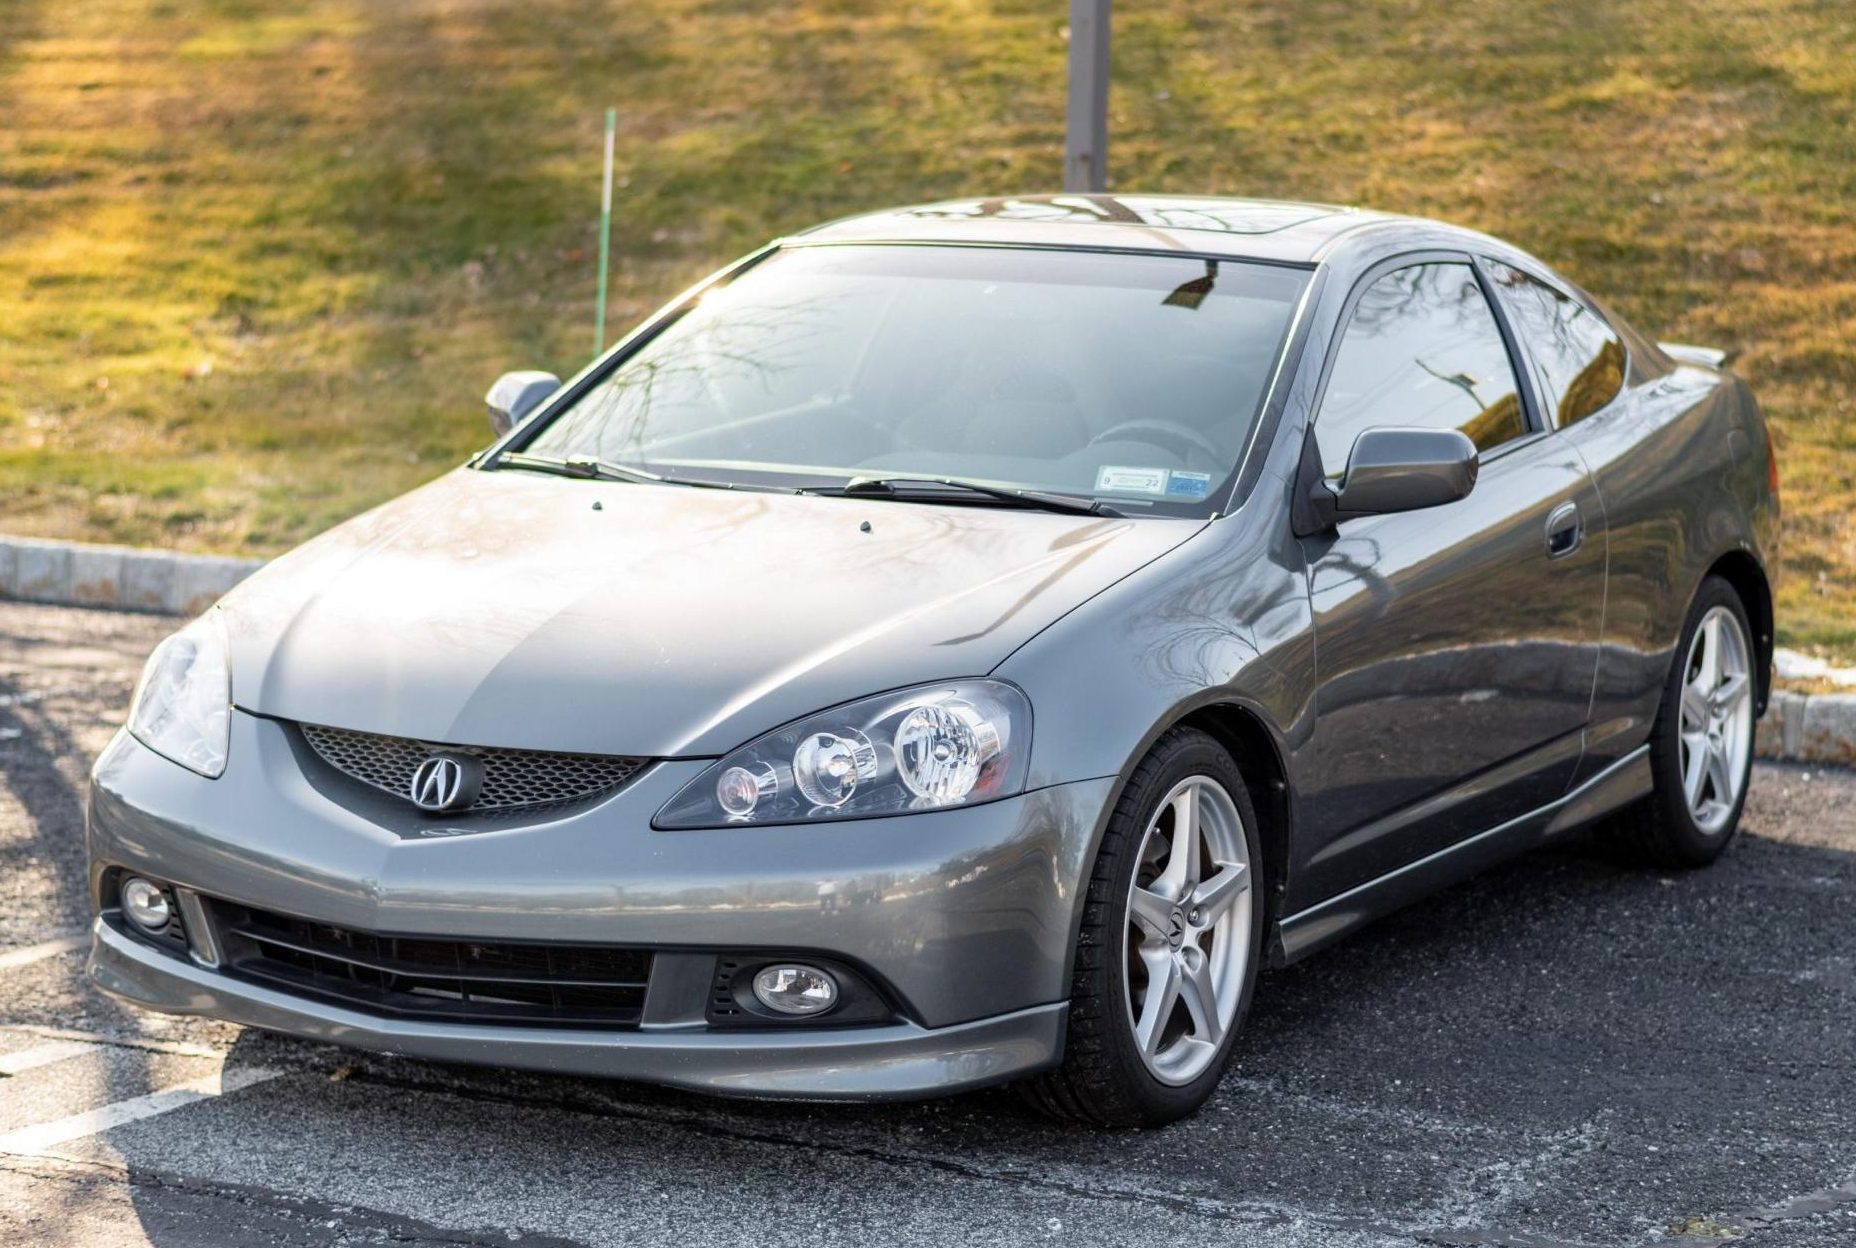 No Reserve: 2005 Acura RSX Type-S 6-Speed for sale on BaT Auctions - sold  for $12,500 on March 29, 2021 (Lot #45,372) | Bring a Trailer